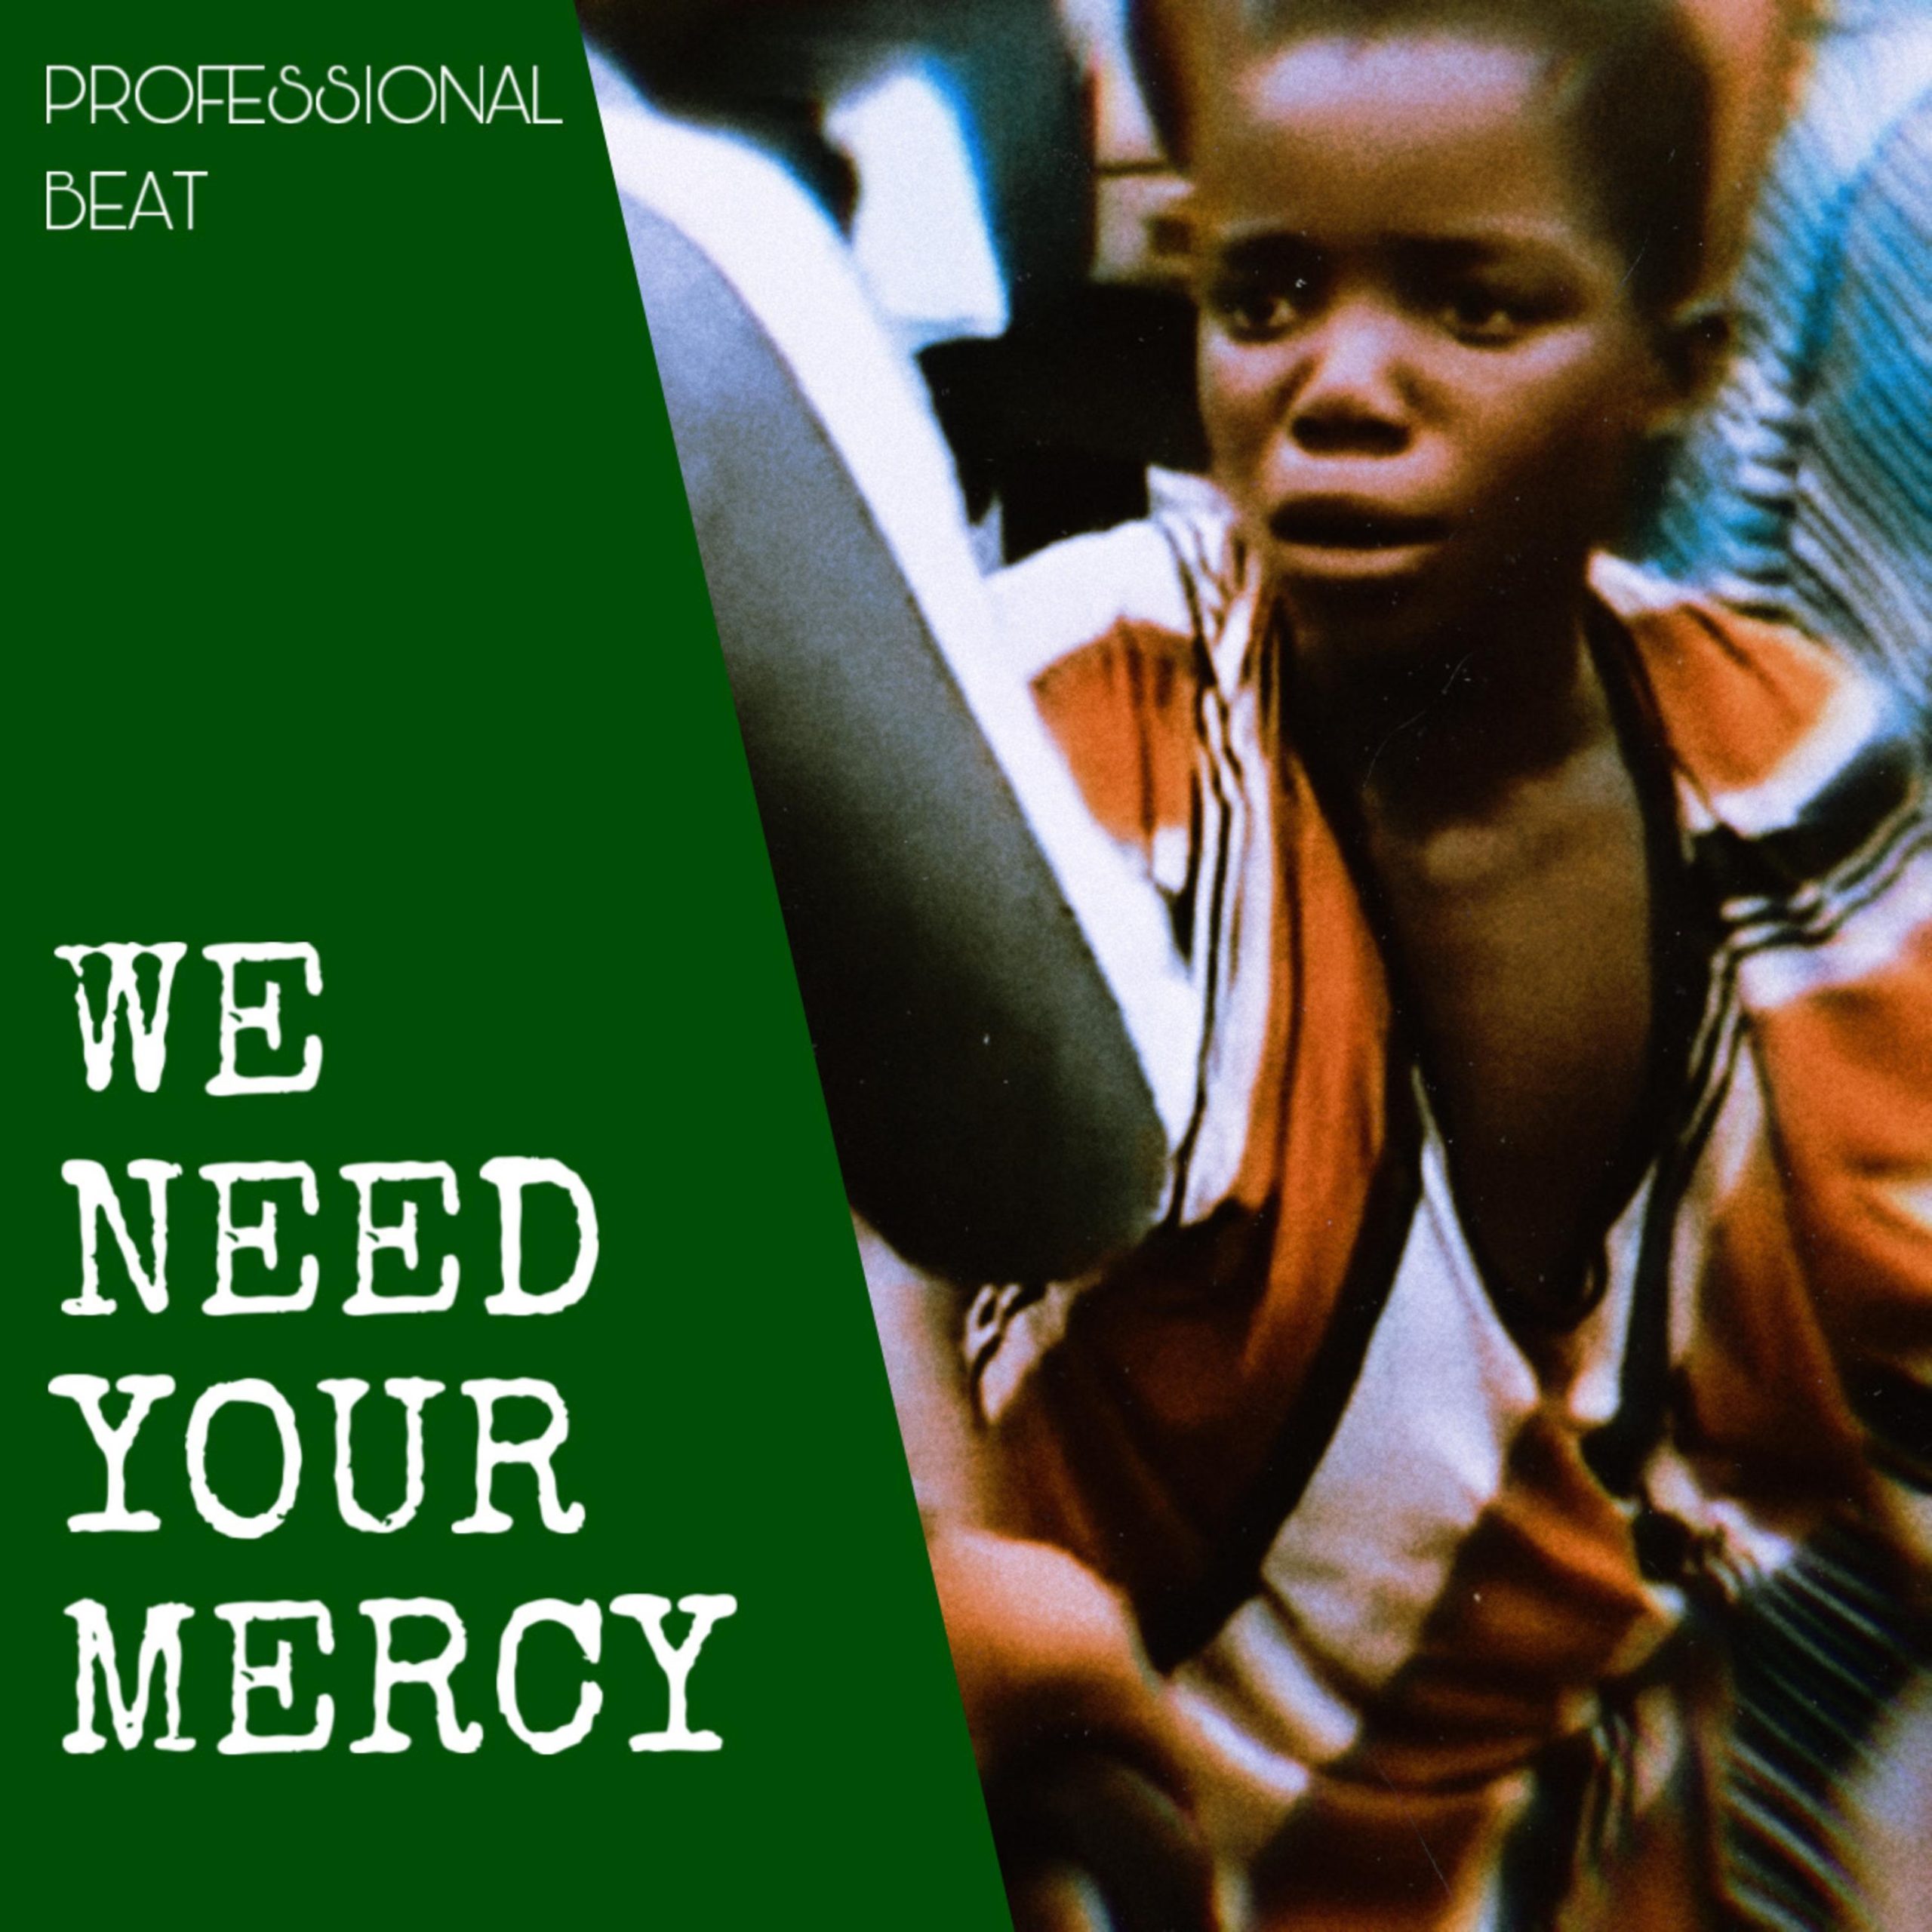 Professional Beat We Need Your Mercy scaled